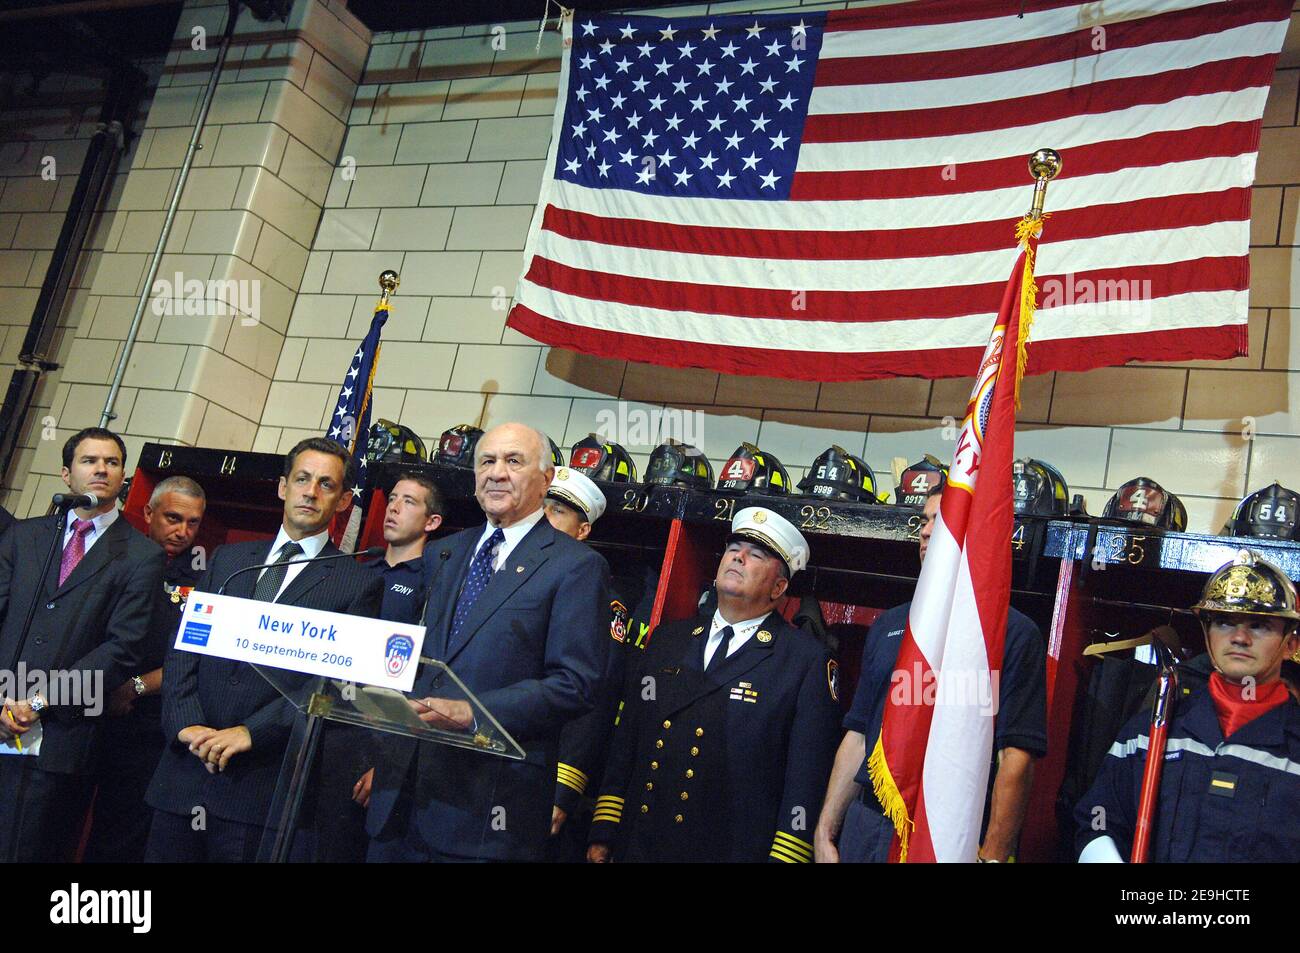 French interior minister Nicolas Sarkozy presents the Medal of Honor of french firefighters to FDNY, in New York City, NY, USA, on September 10, 2006. Photo by Lionel Hahn/ABACAPRESS.COM Stock Photo